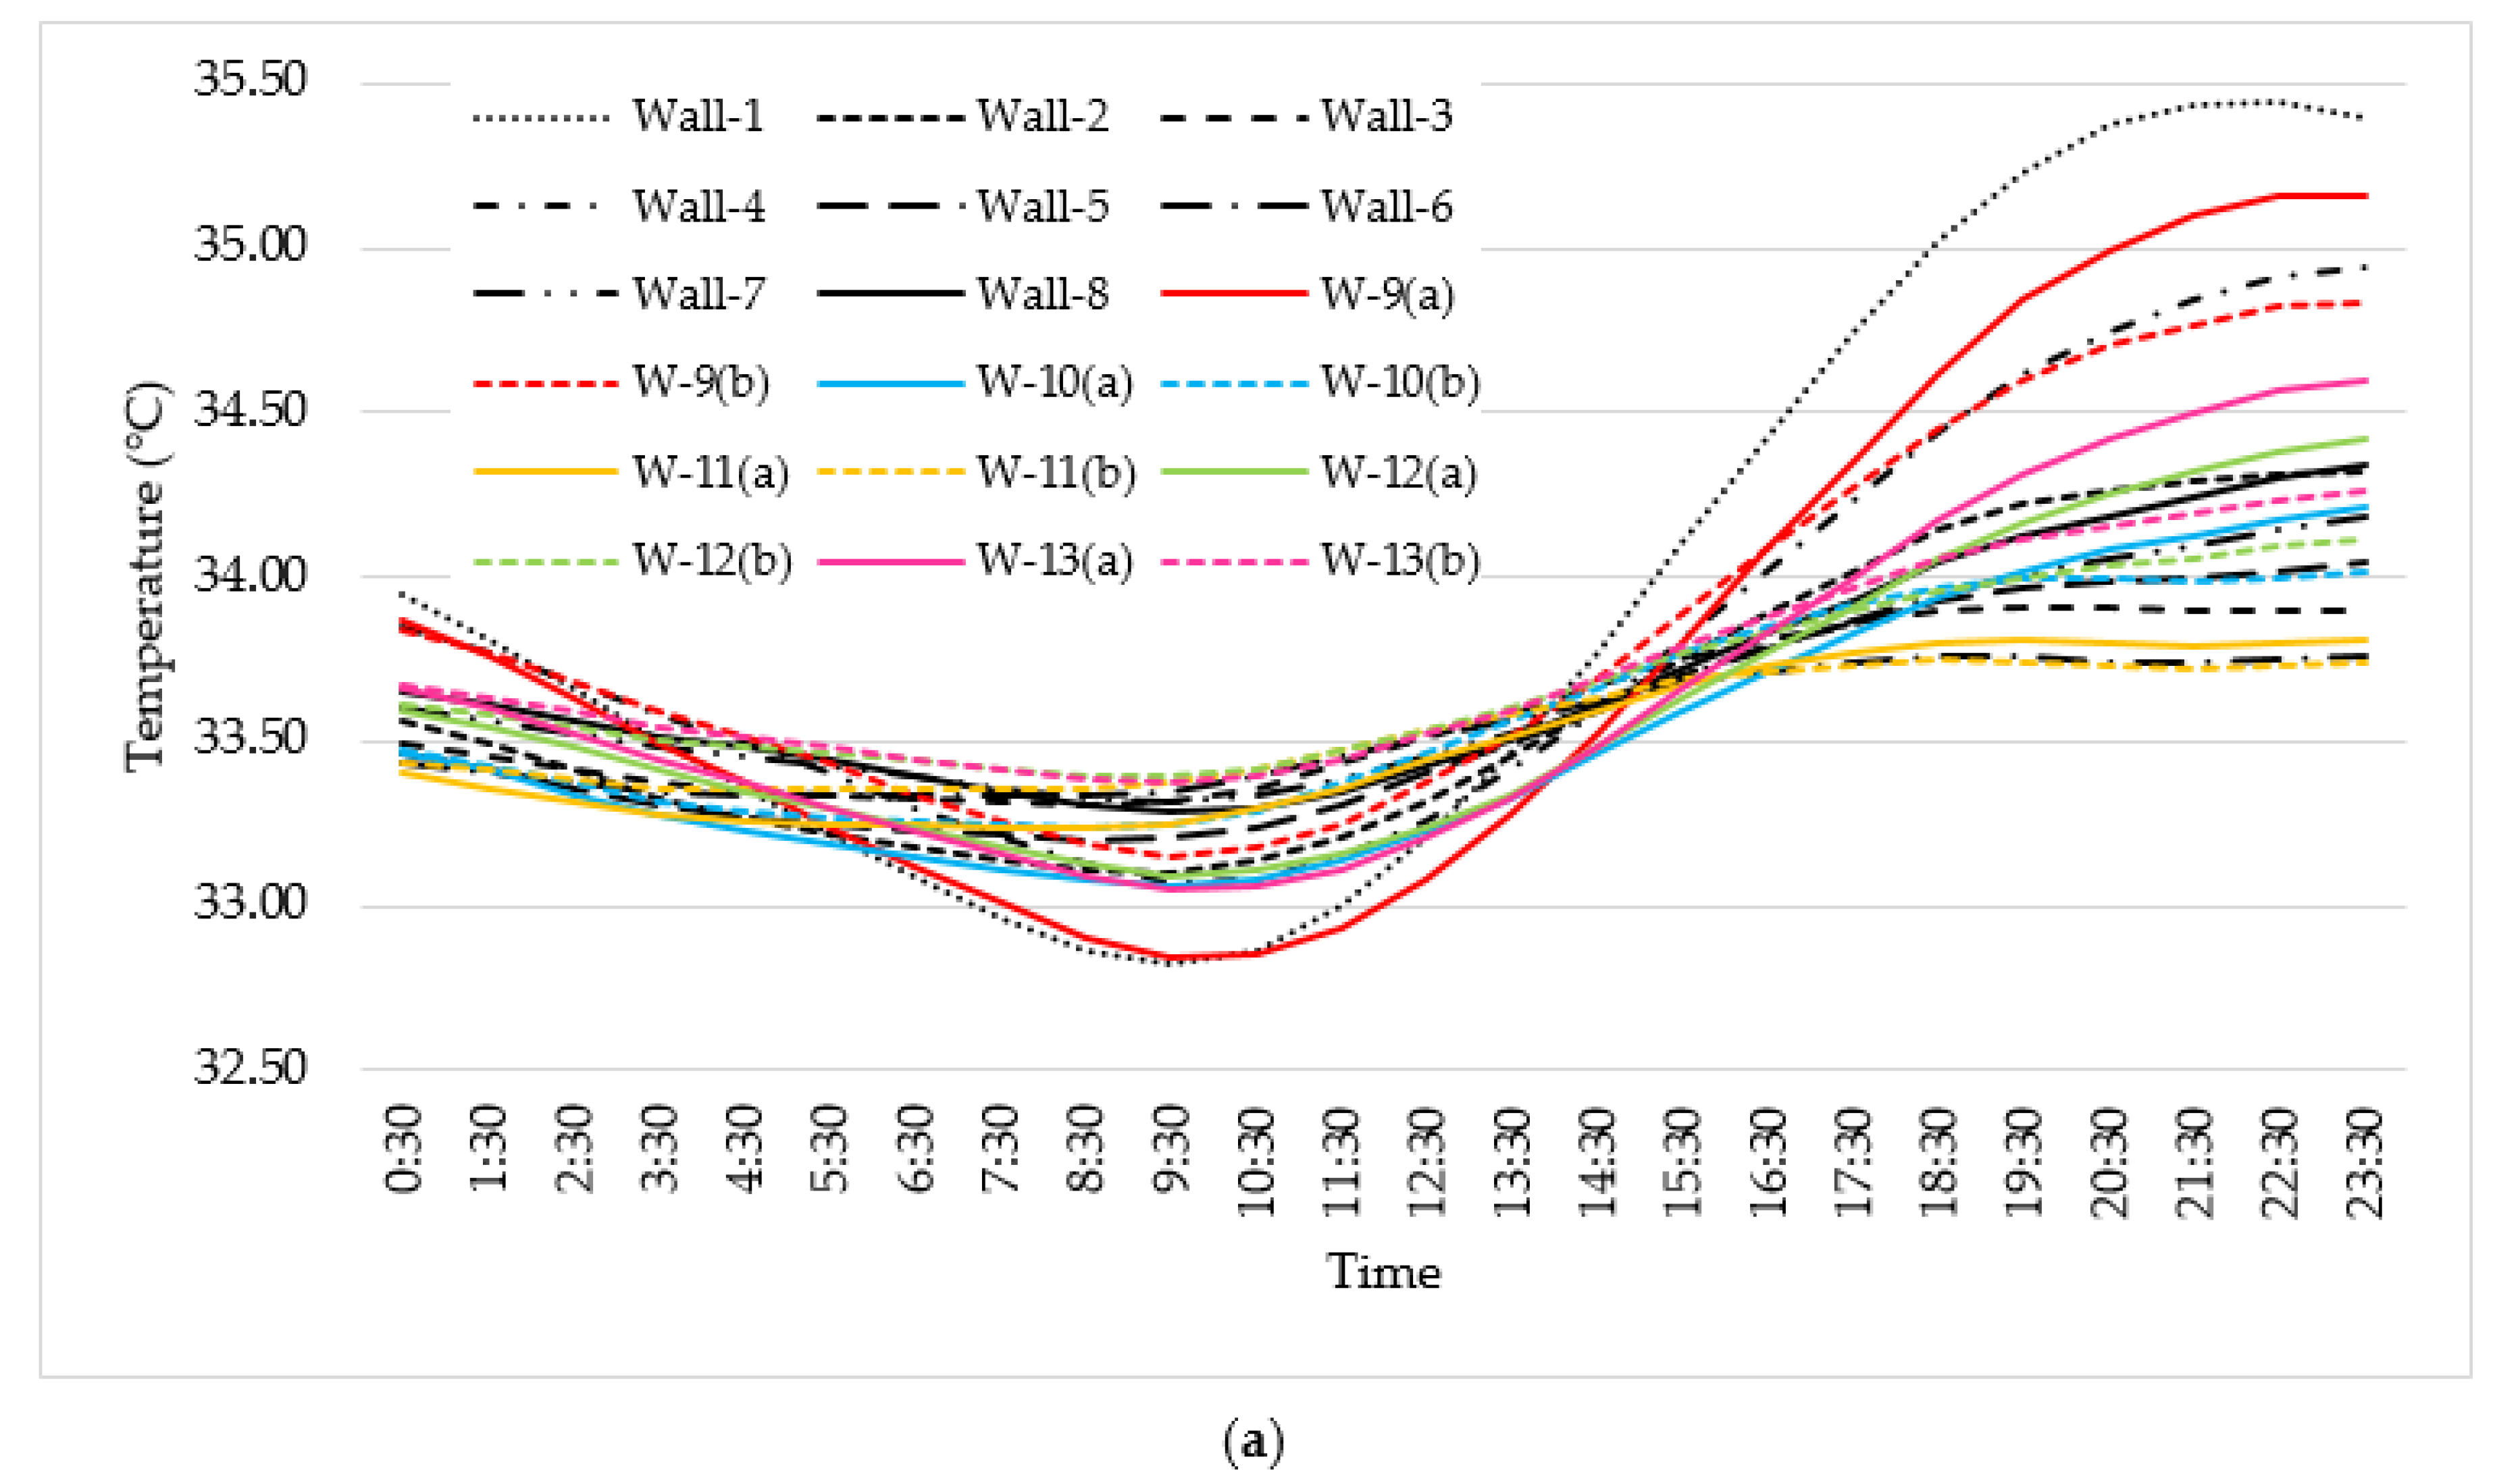 Sustainability Free Full Text A Comparative Simulation Study Of The Thermal Performances Of The Building Envelope Wall Materials In The Tropics Html